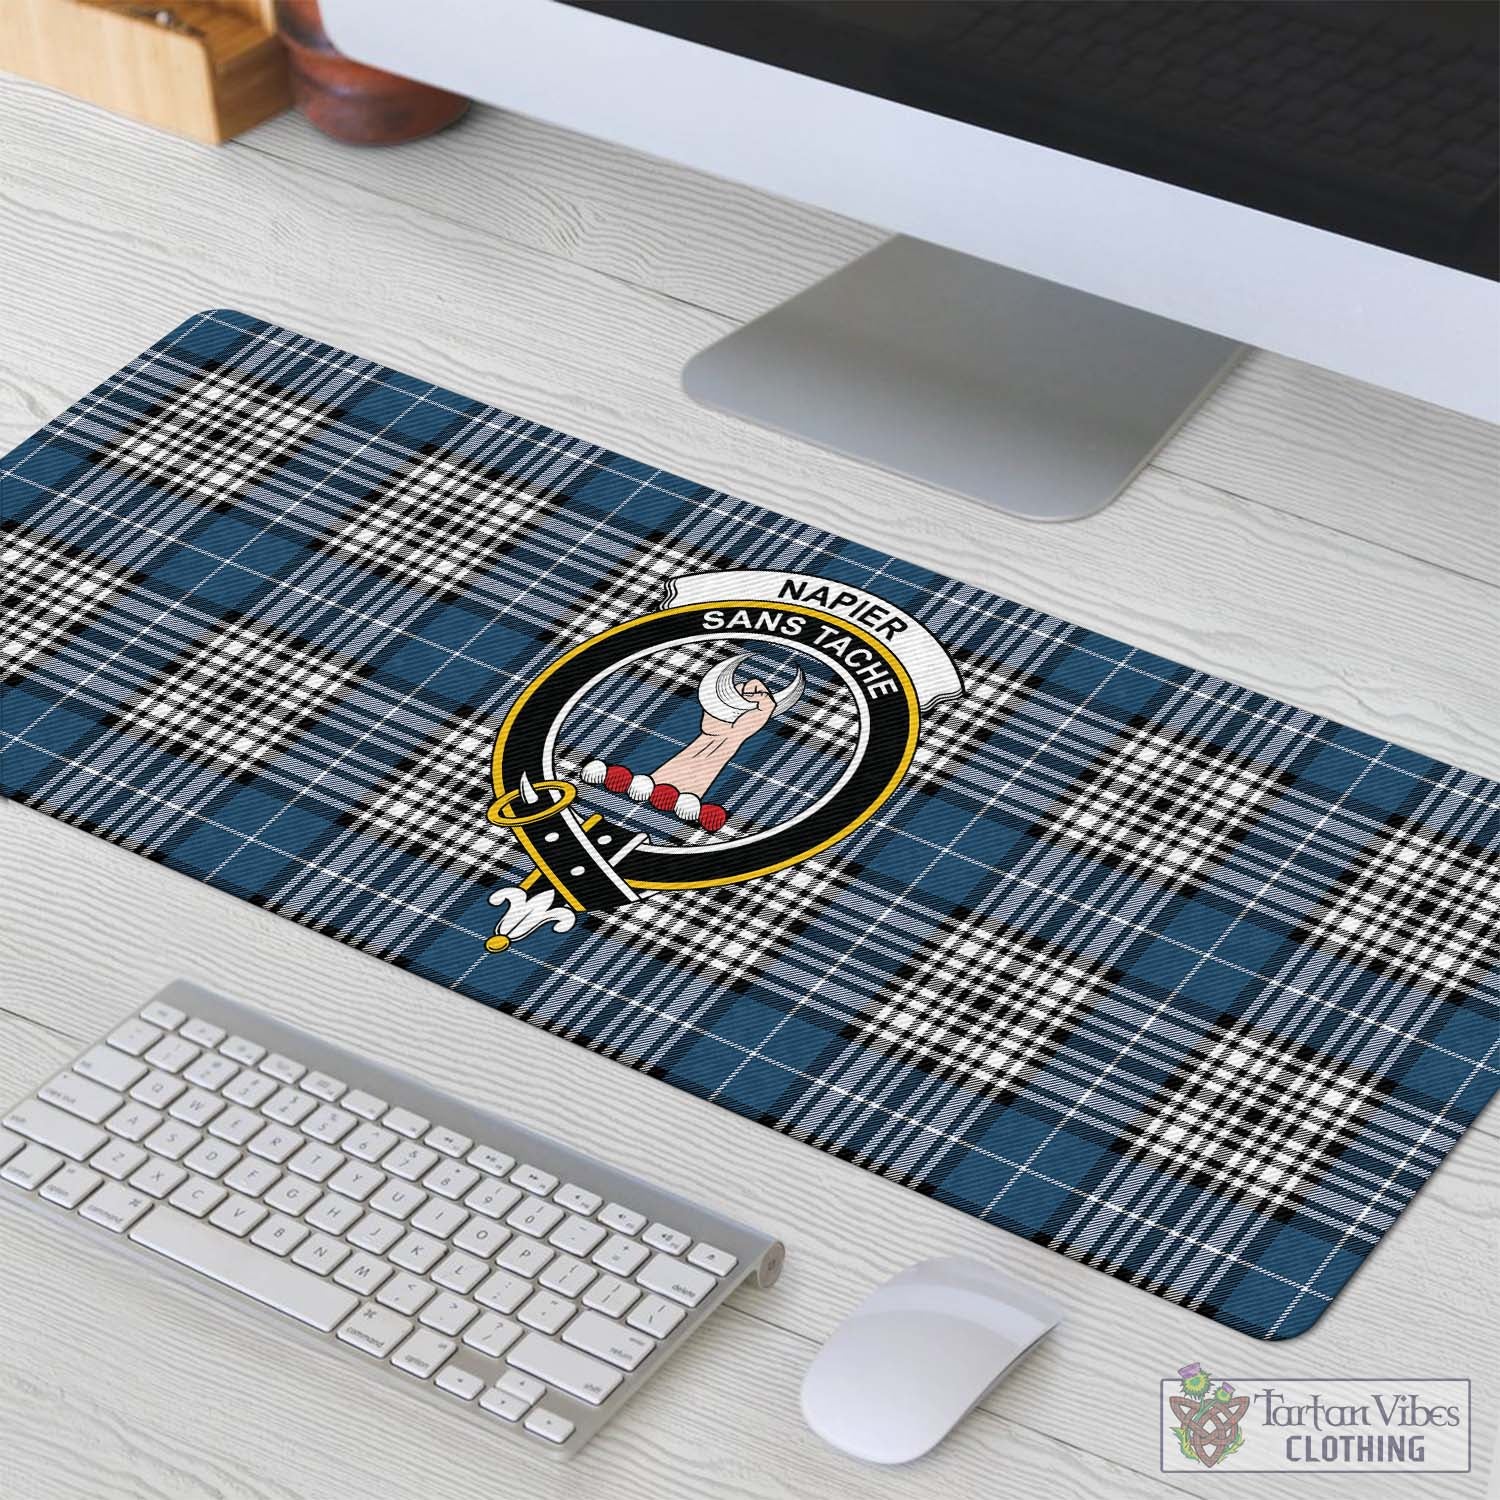 Tartan Vibes Clothing Napier Modern Tartan Mouse Pad with Family Crest